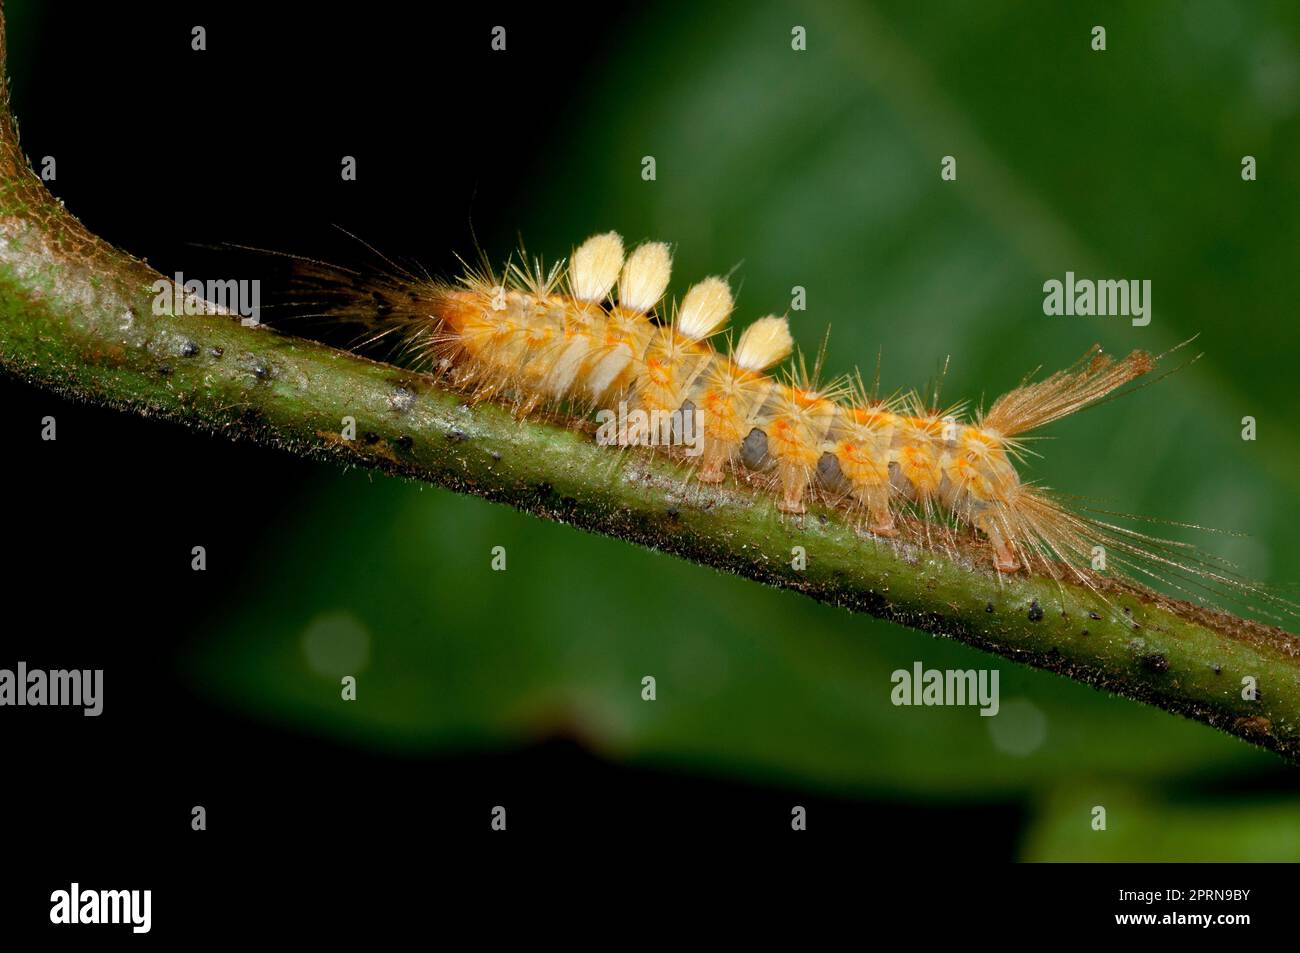 Tussock Moth Caterpillar, Lymantriidae Family, with long hairs for protection, Klungkung, Bali, Indonesia Stock Photo